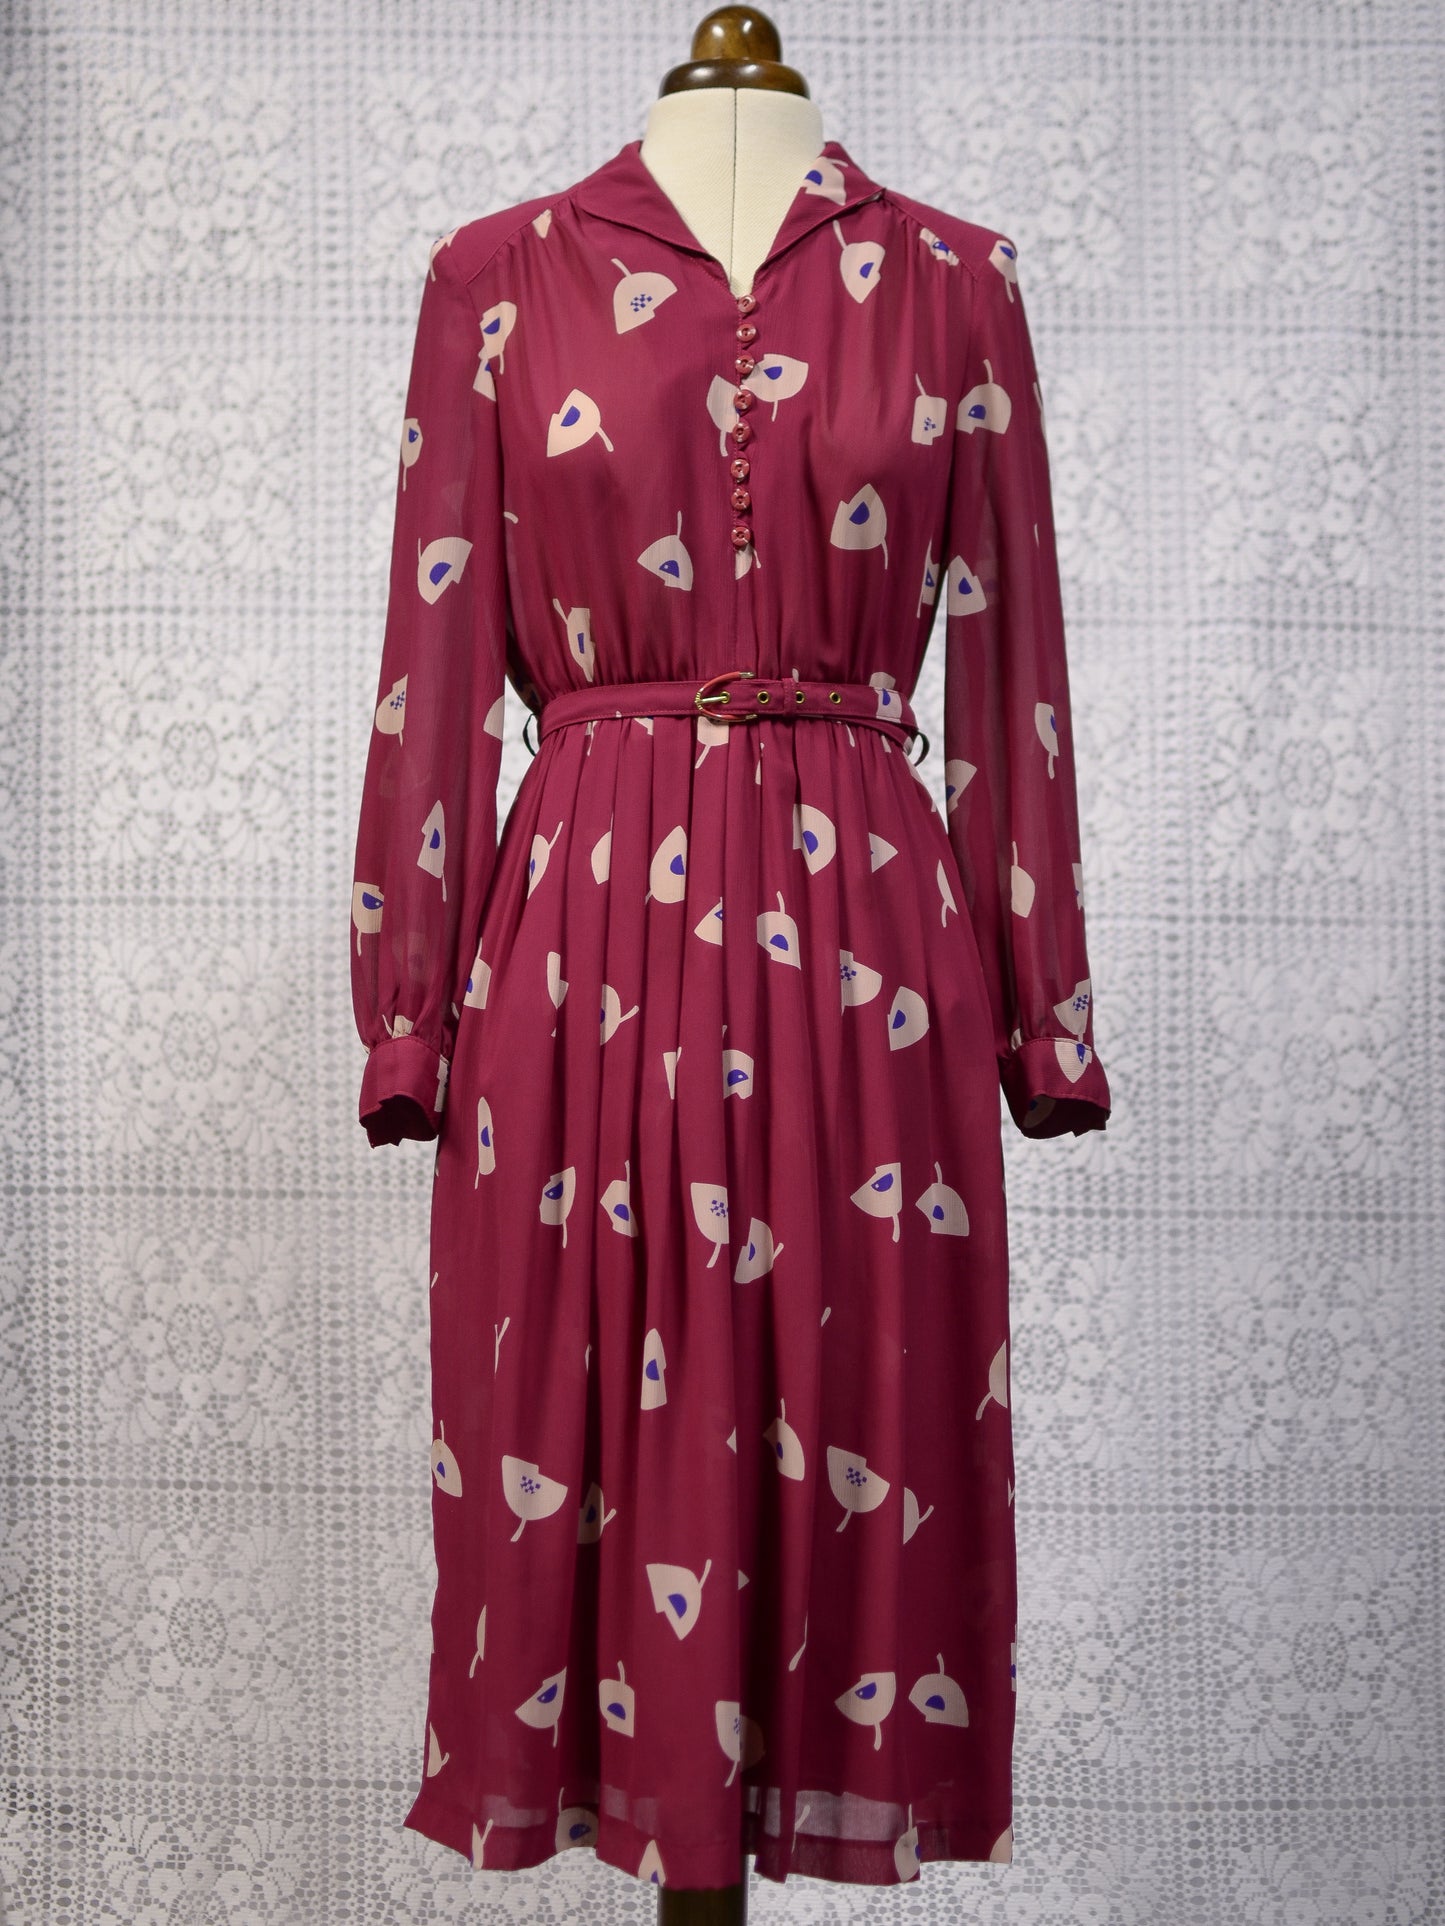 1980s Japanese dark red belted shirt dress with abstract floral pattern